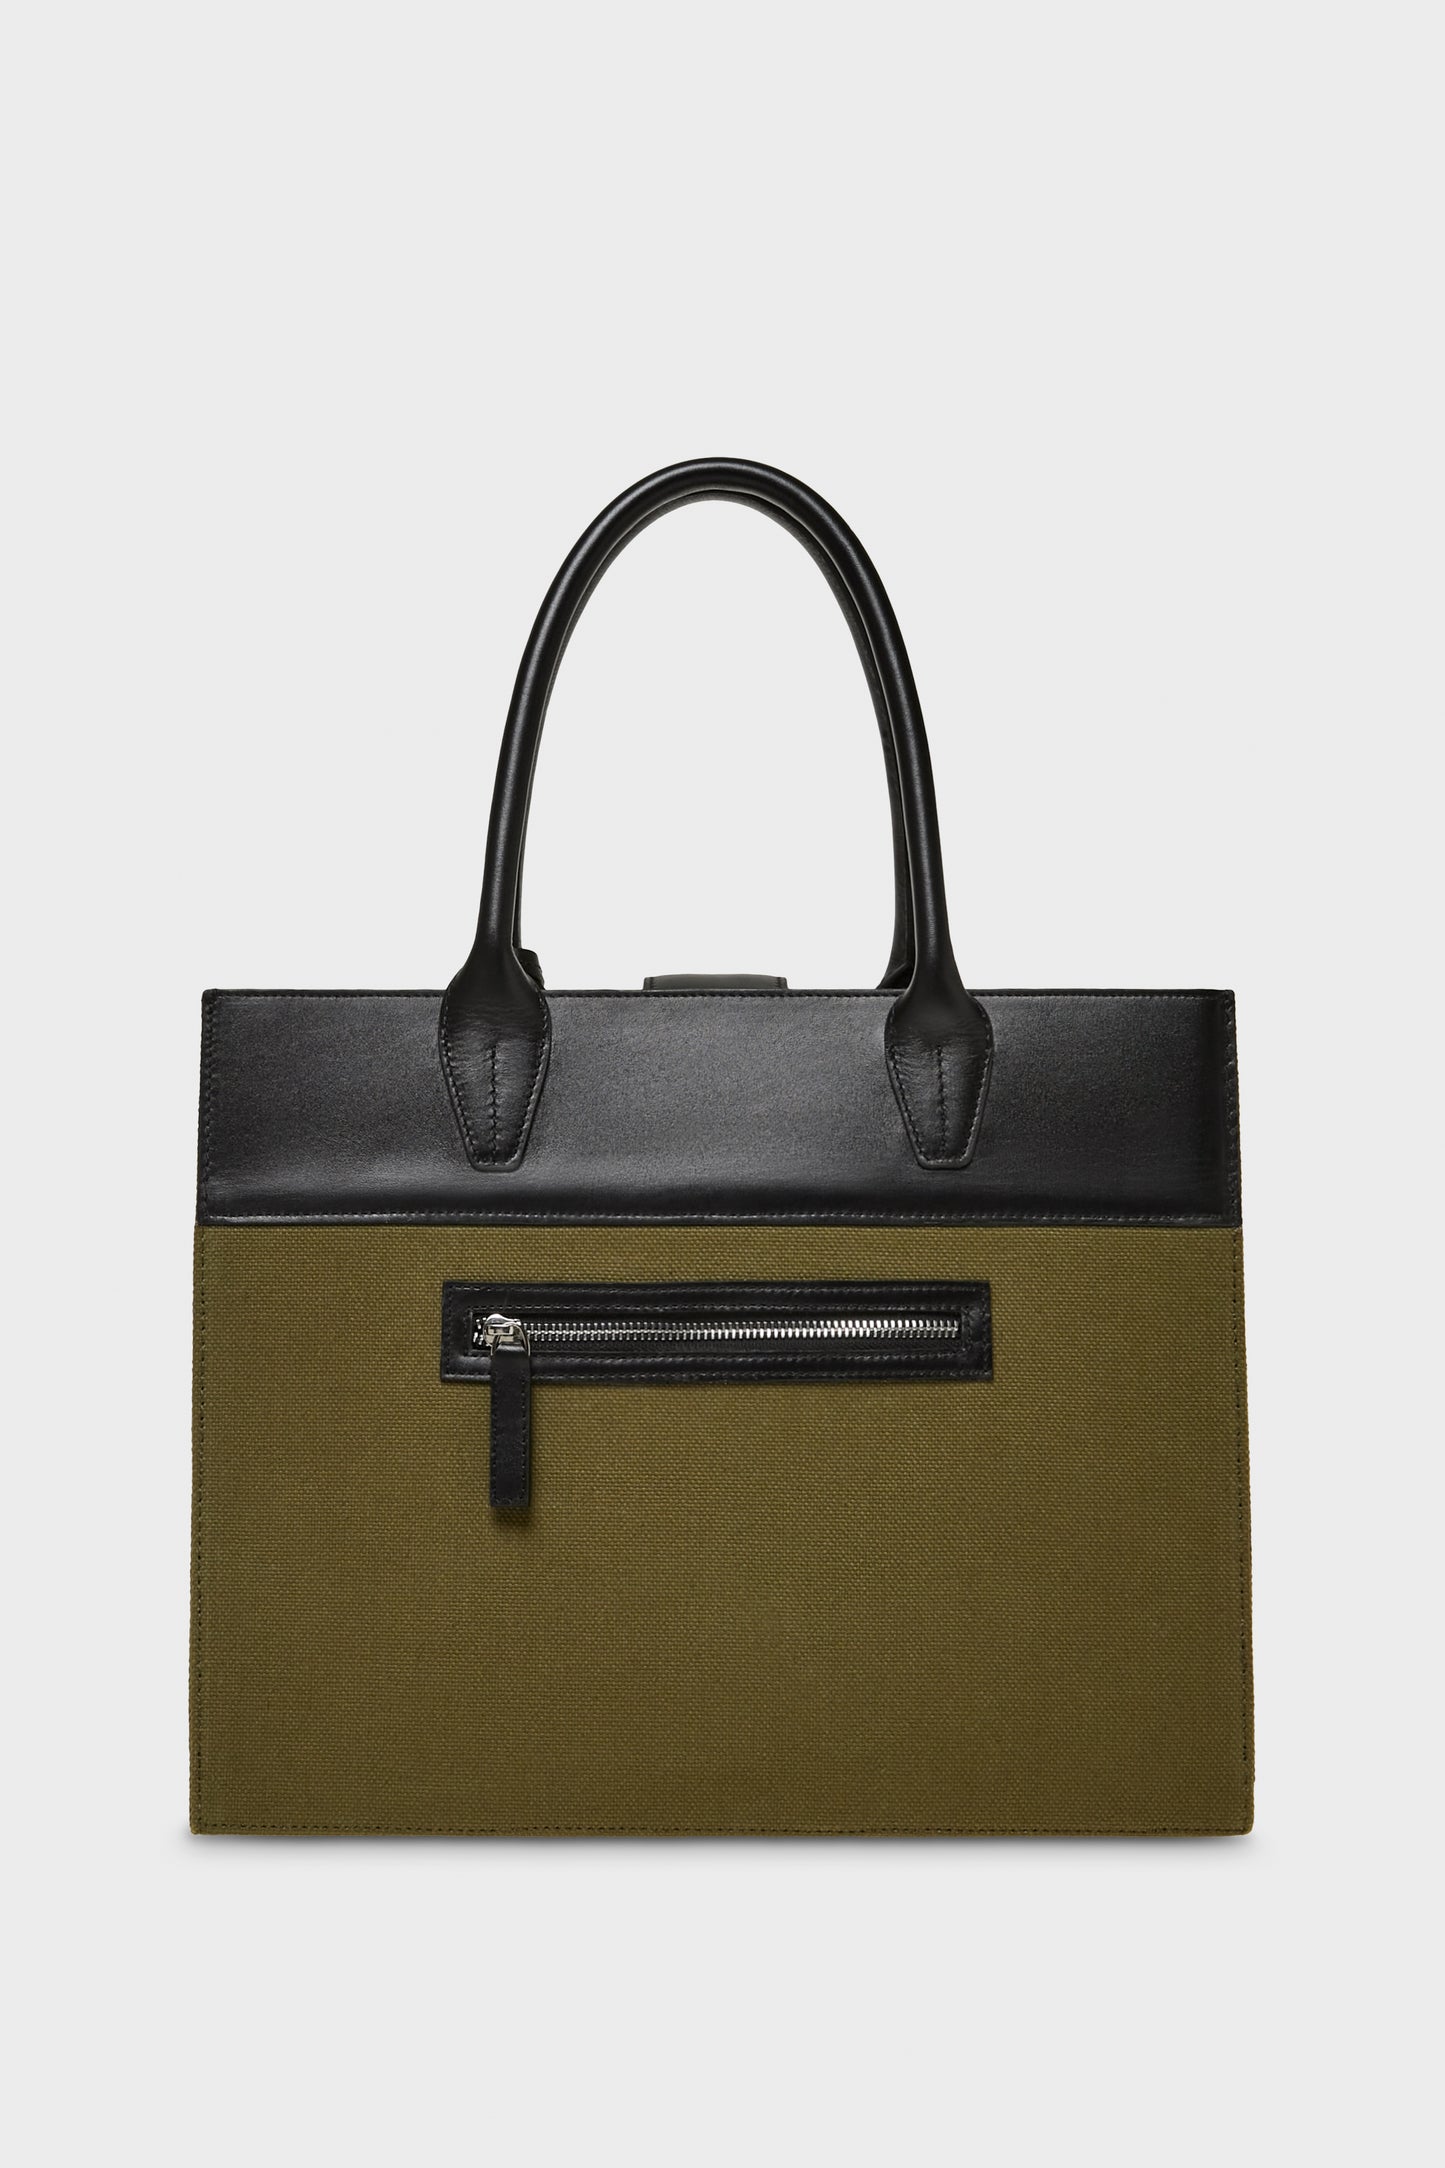 OLIVE WATSON TOTE BAG IN CANVAS AND SMOOTH LEATHER